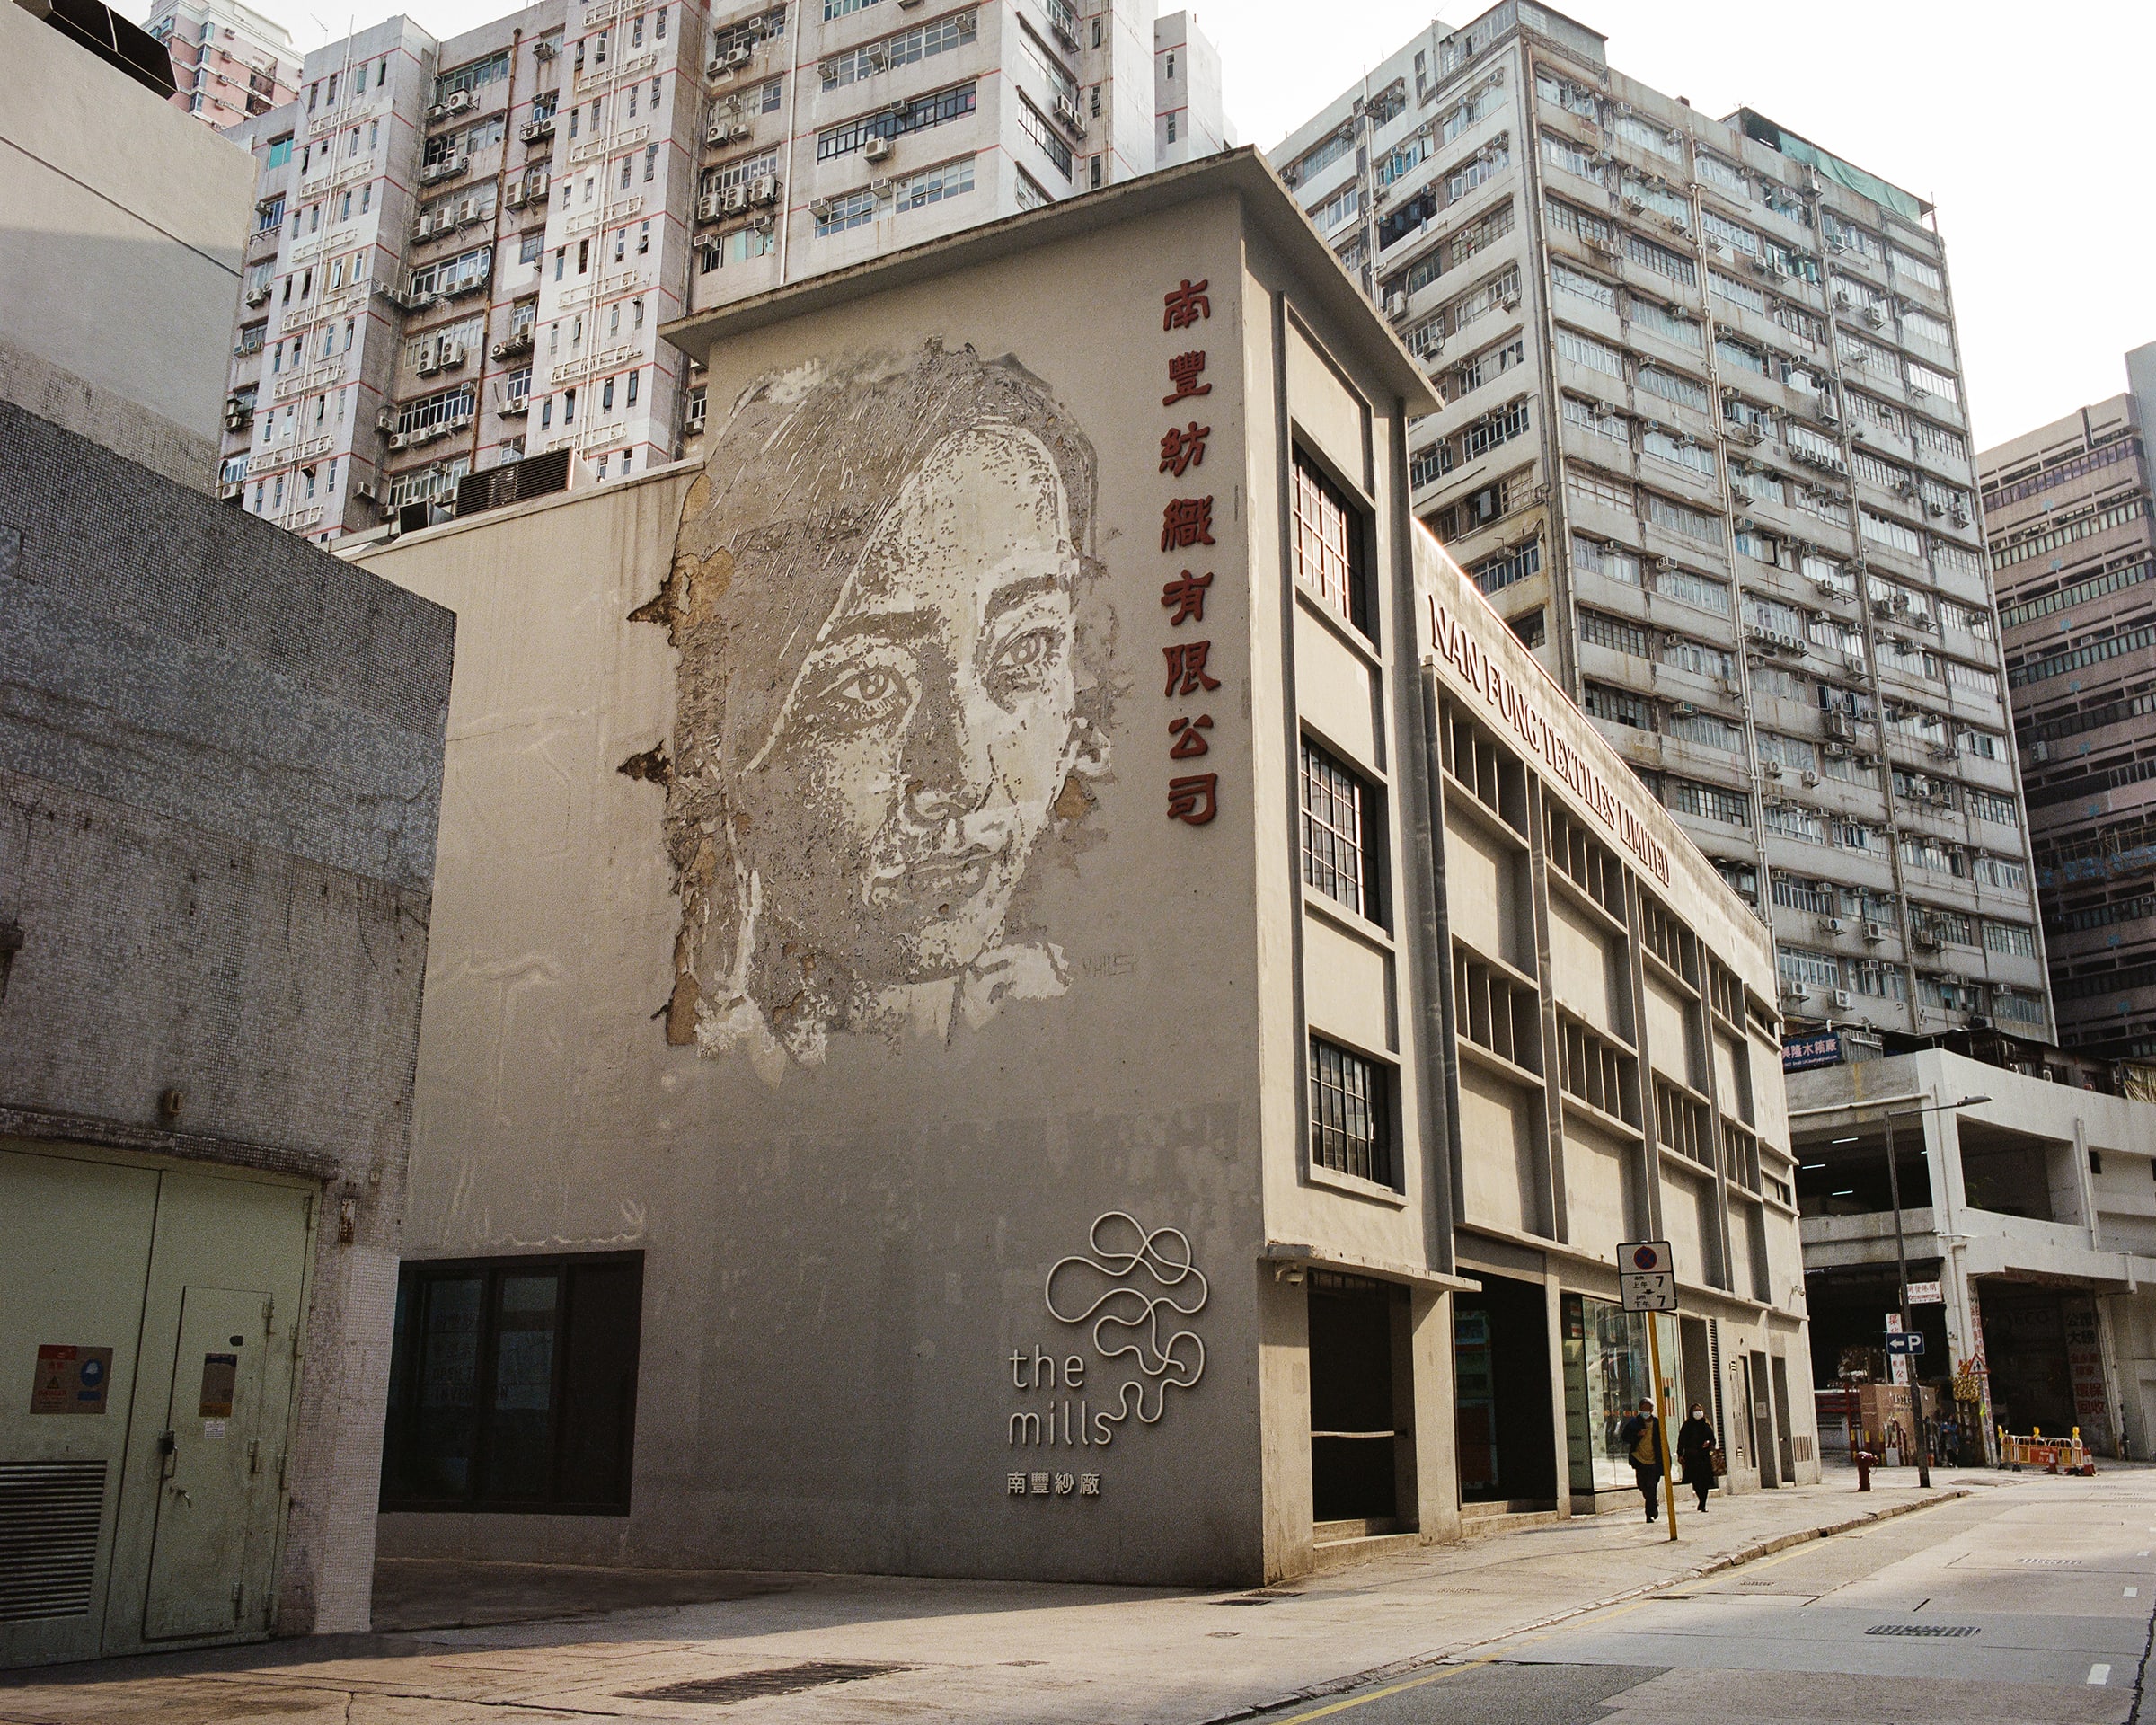 The Centre for Heritage, Arts, and Textile (CHAT) in Tsuen Wan. Photograph by Simon Shilling for Art Basel.